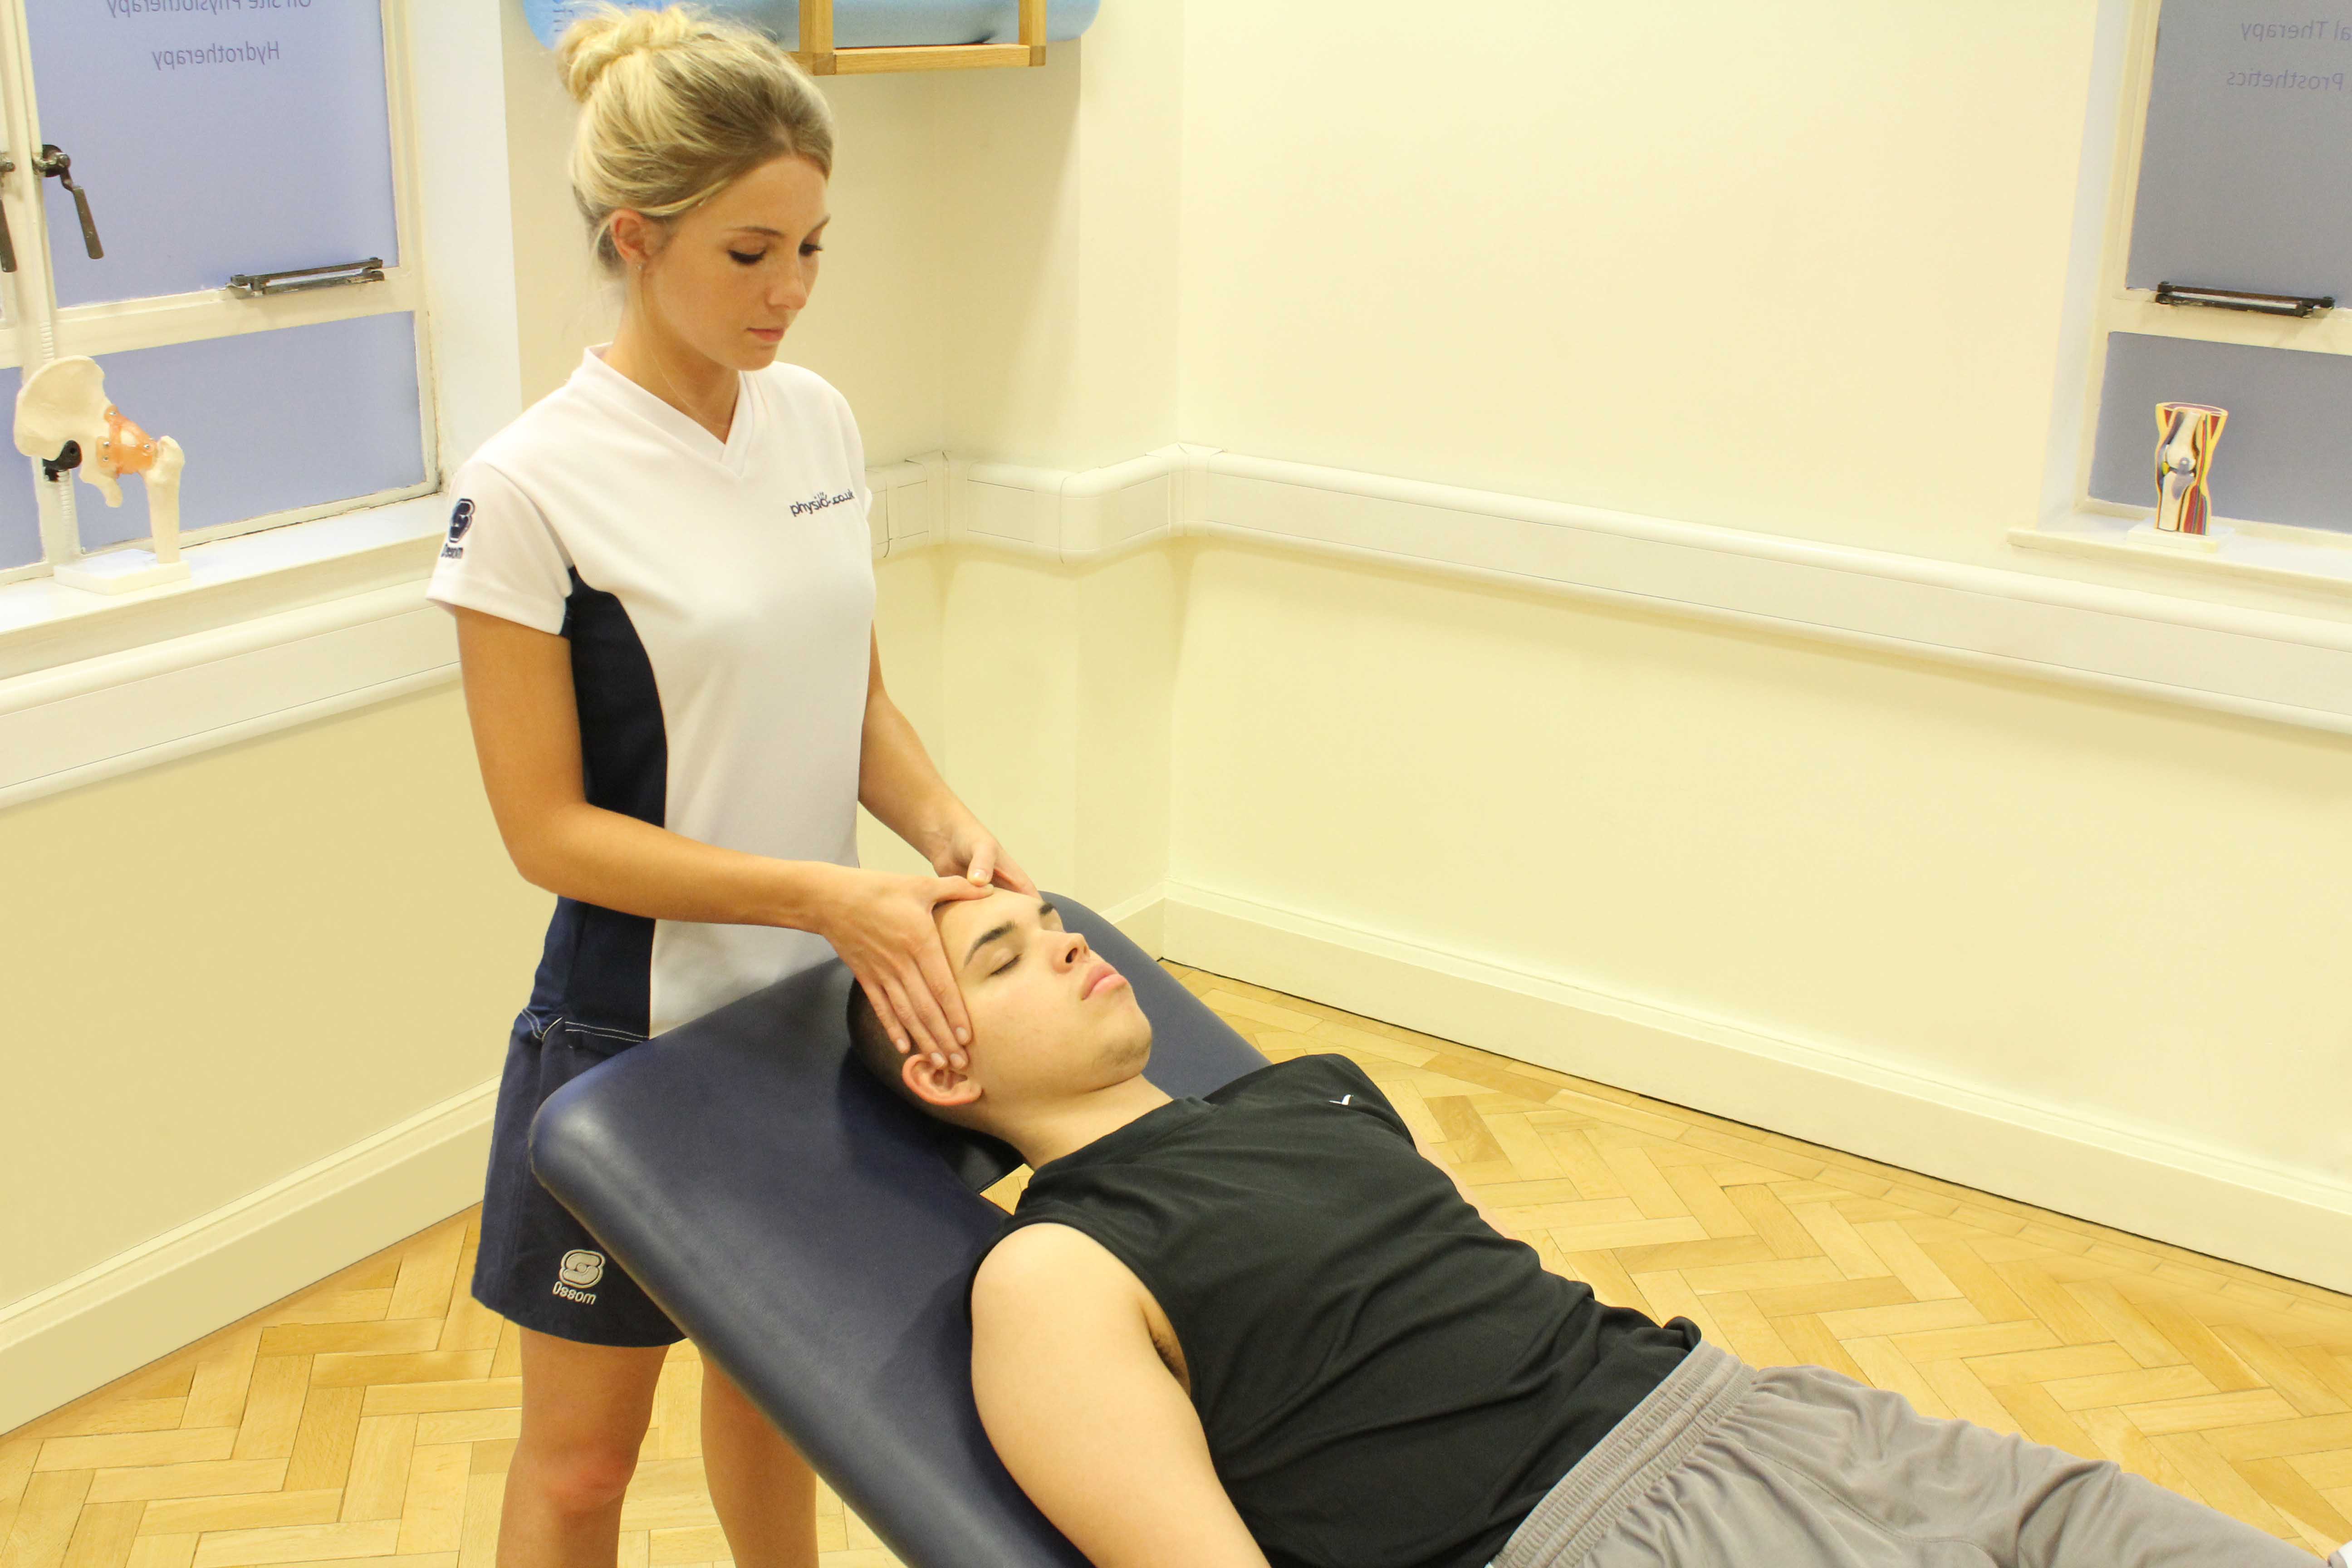 Cranial and neck soft tissue massage to relieve tension and promte relaxation, elevating endorphins.